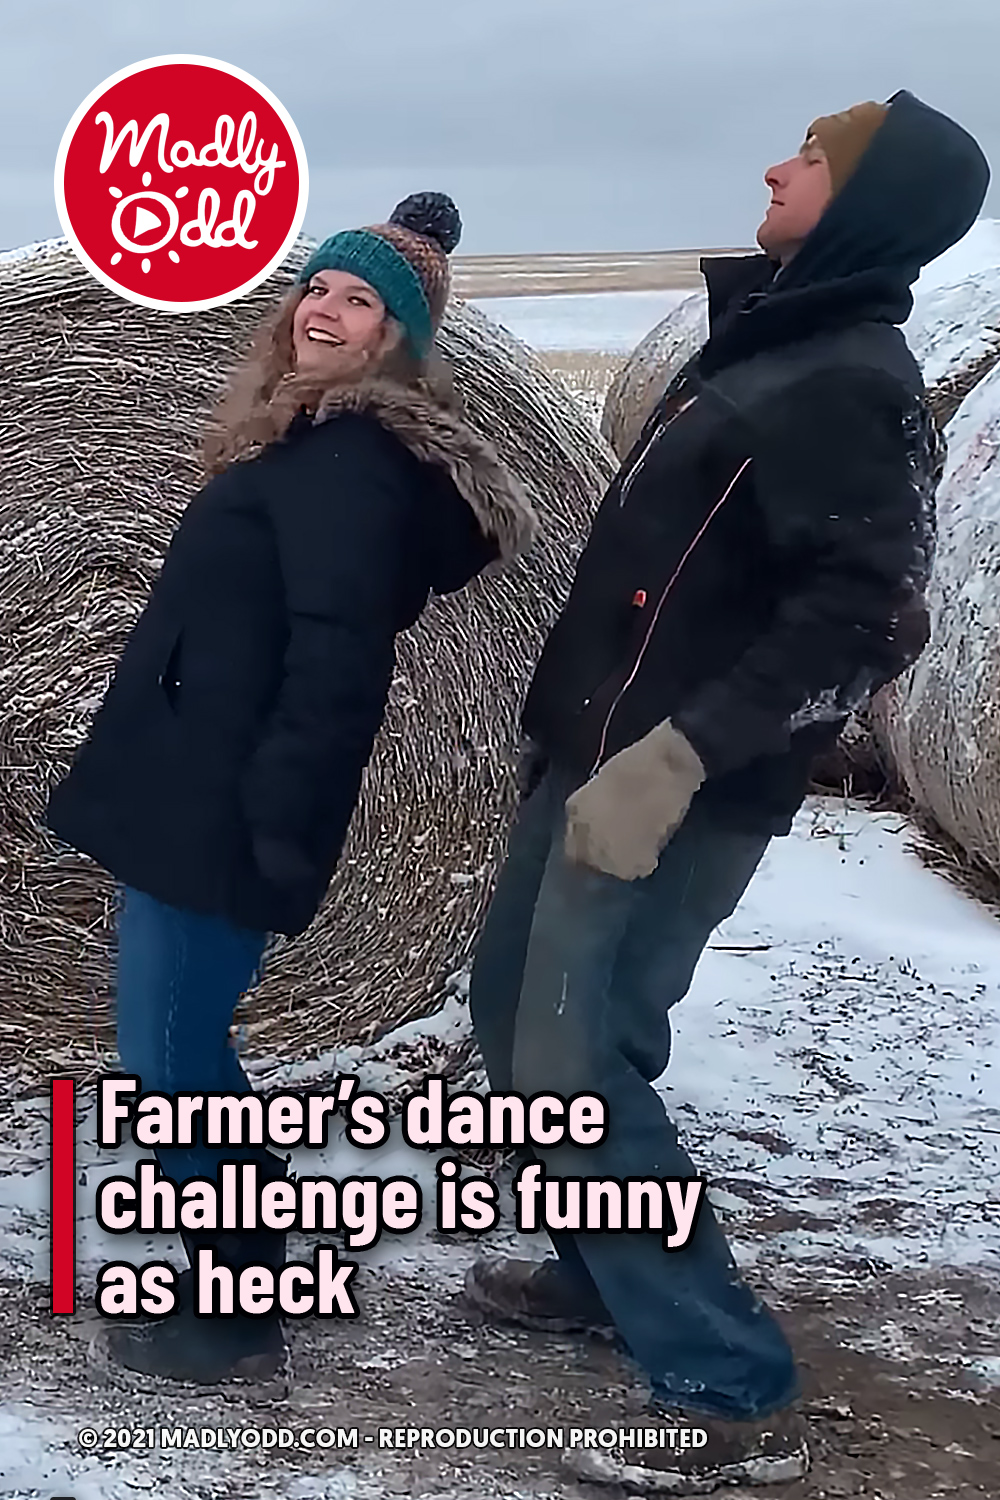 Farmer’s dance challenge is funny as heck